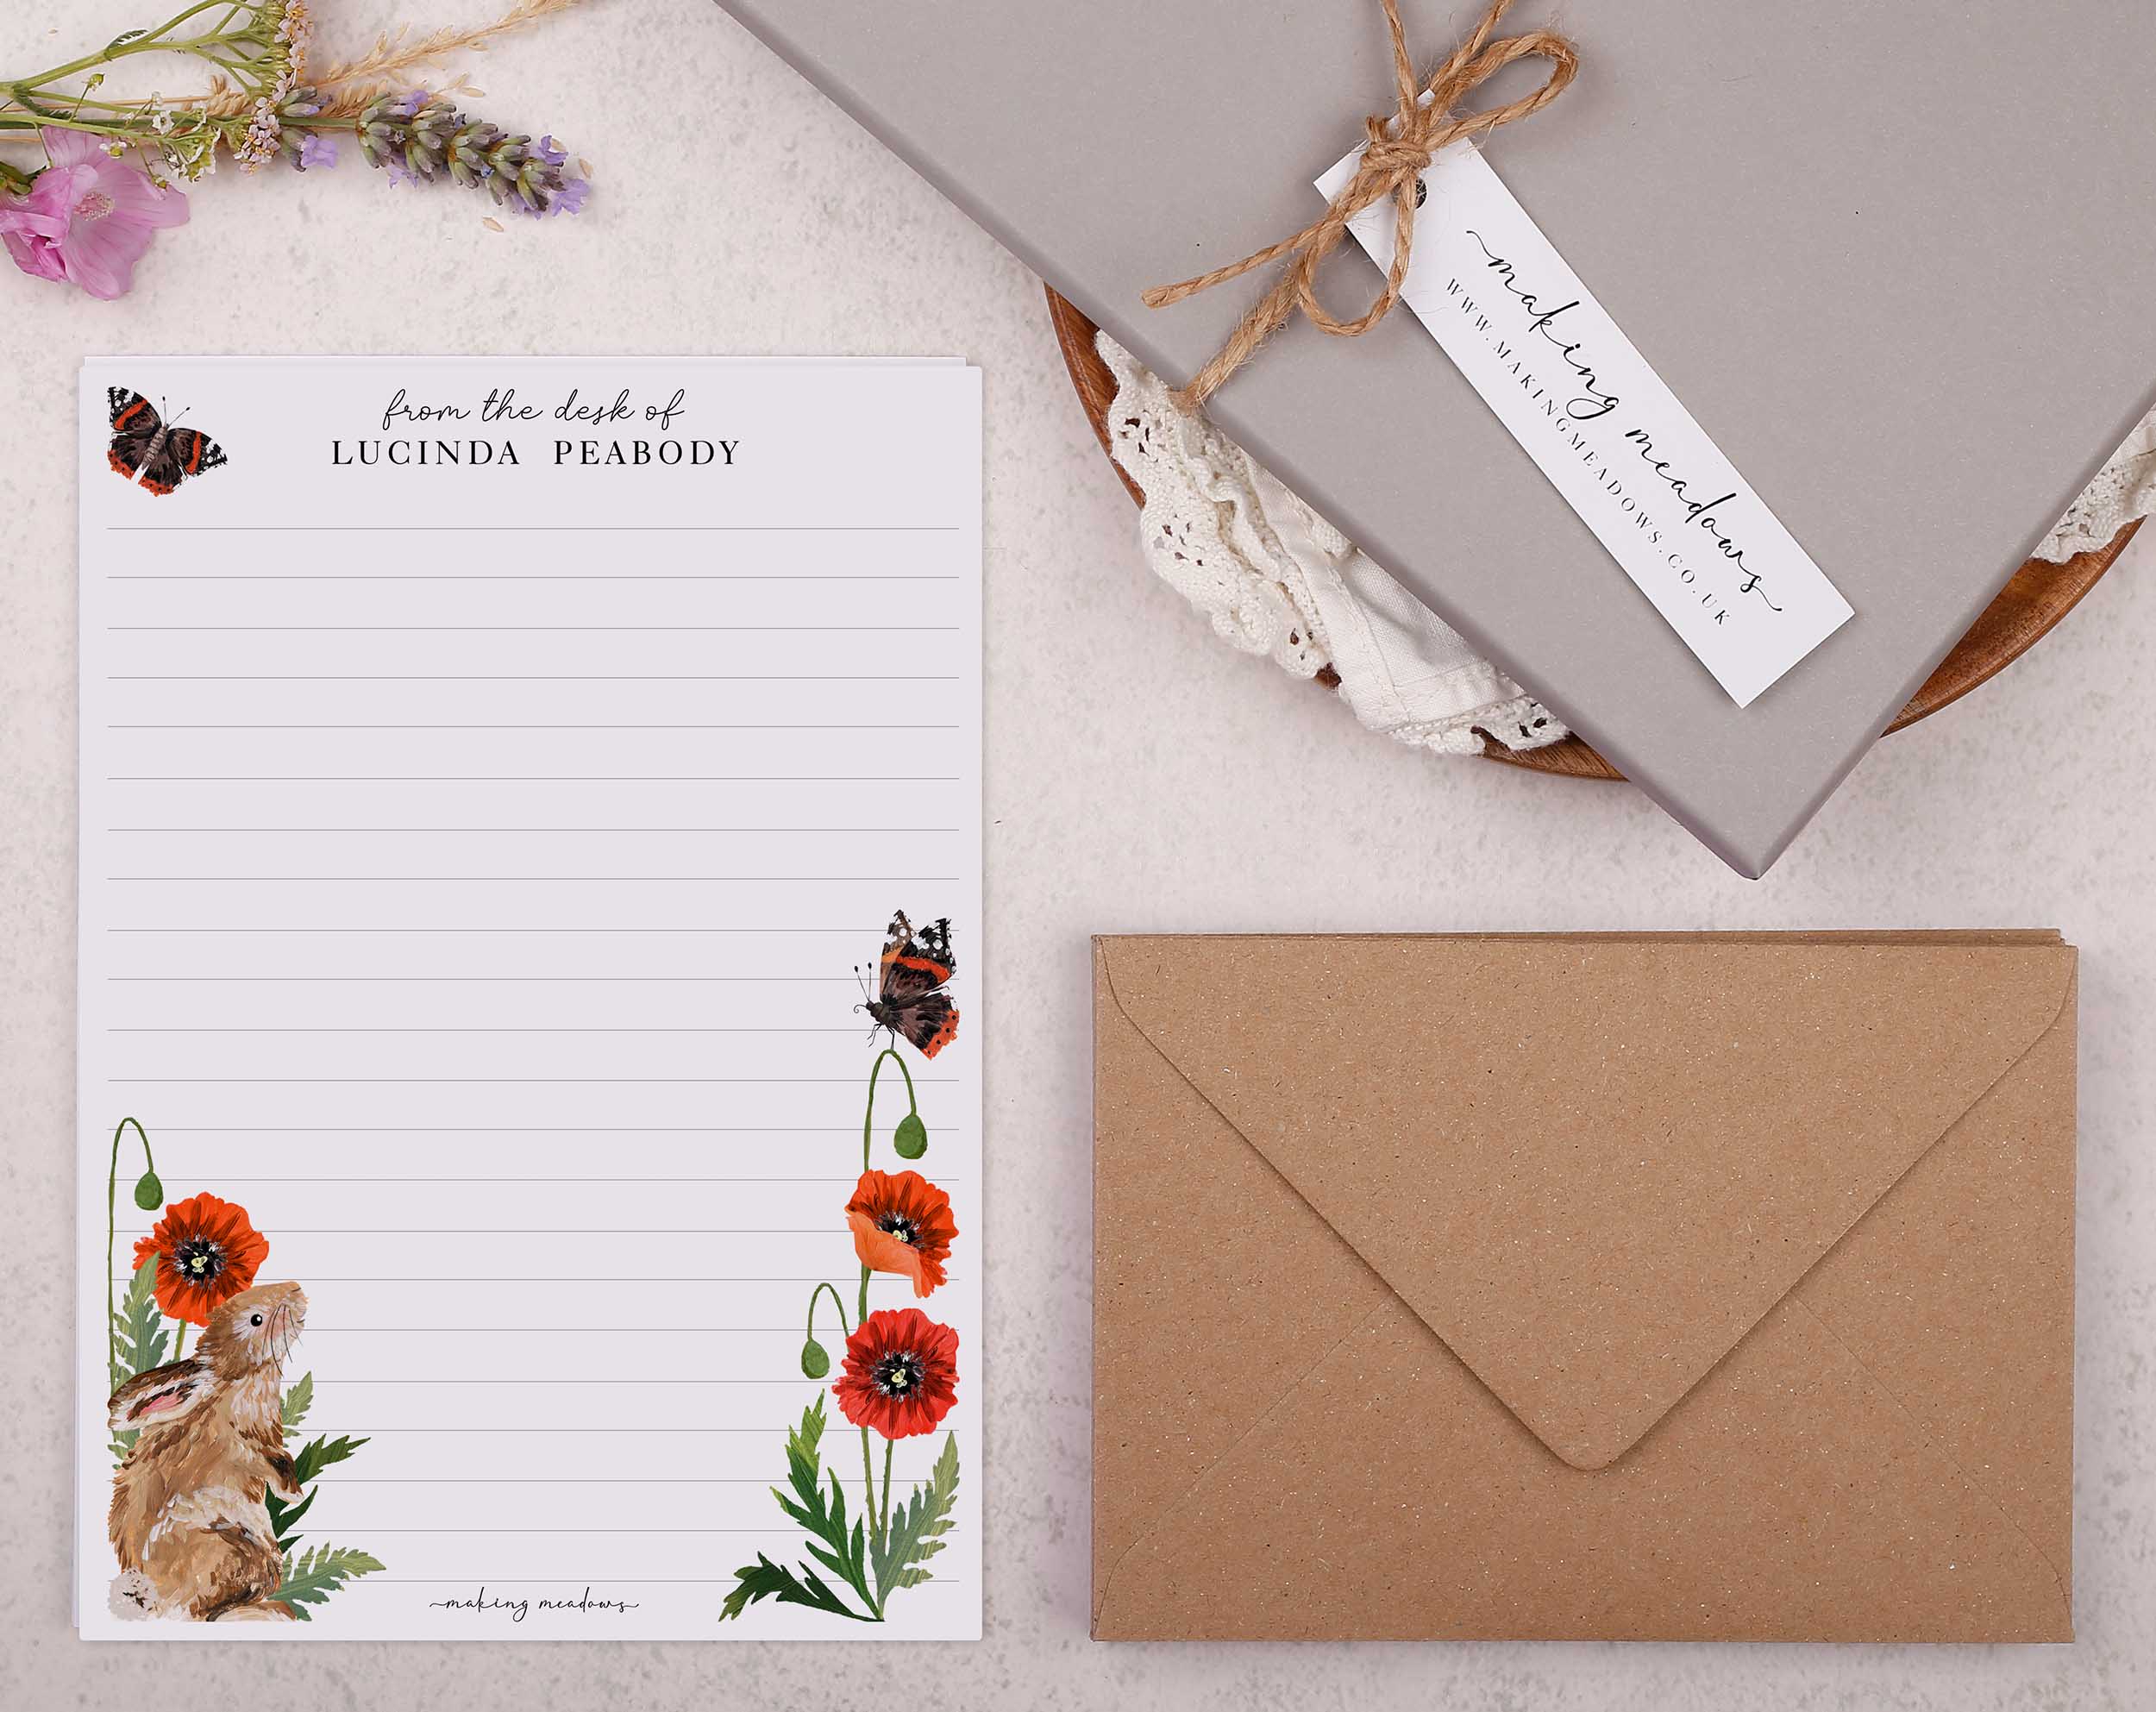 Premium personalised A5 letter writing paper set with a beautiful rabbit and poppy illustration scattered around the border of the letter paper sheets.